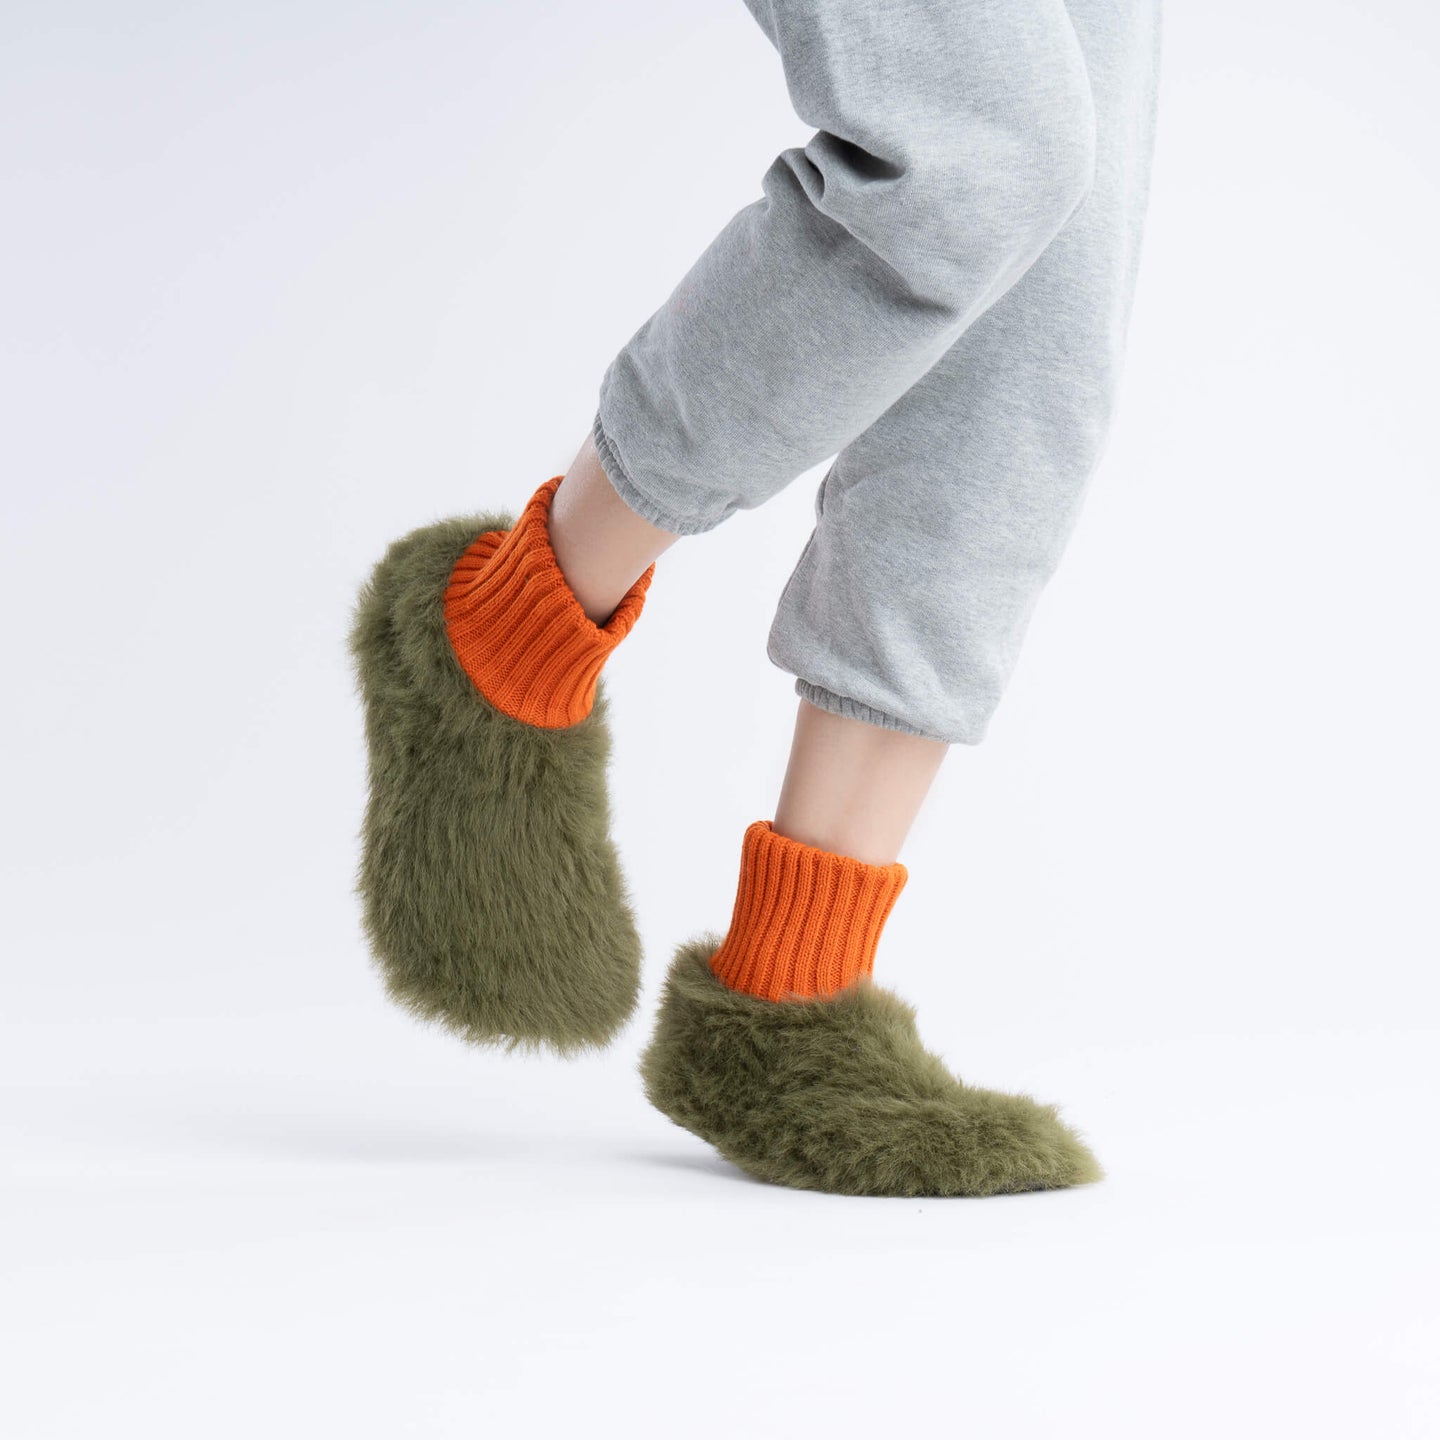 Furry Fuzzy Sock Slippers Monster Muppet Booties Warm Fuzzy Slippers